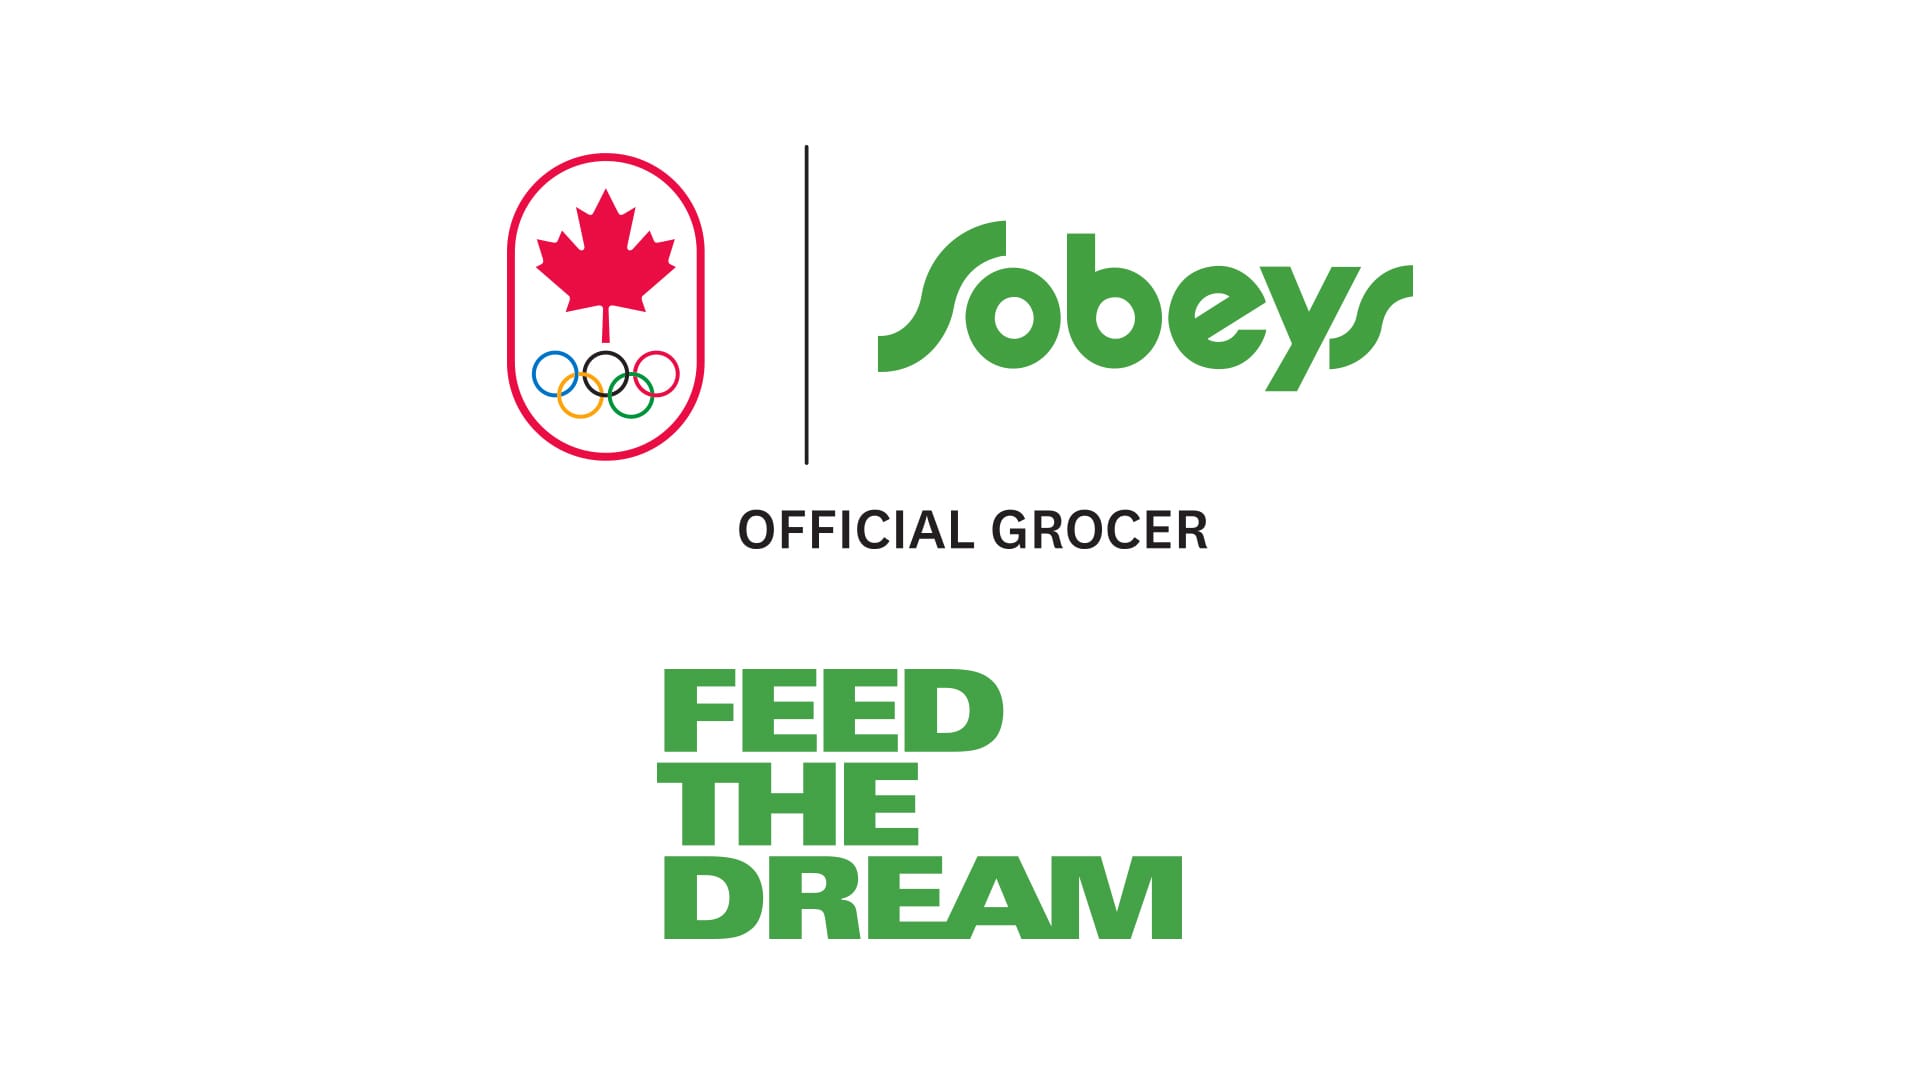 COC and Sobeys logos next to each other and Feed the Dream title underneath